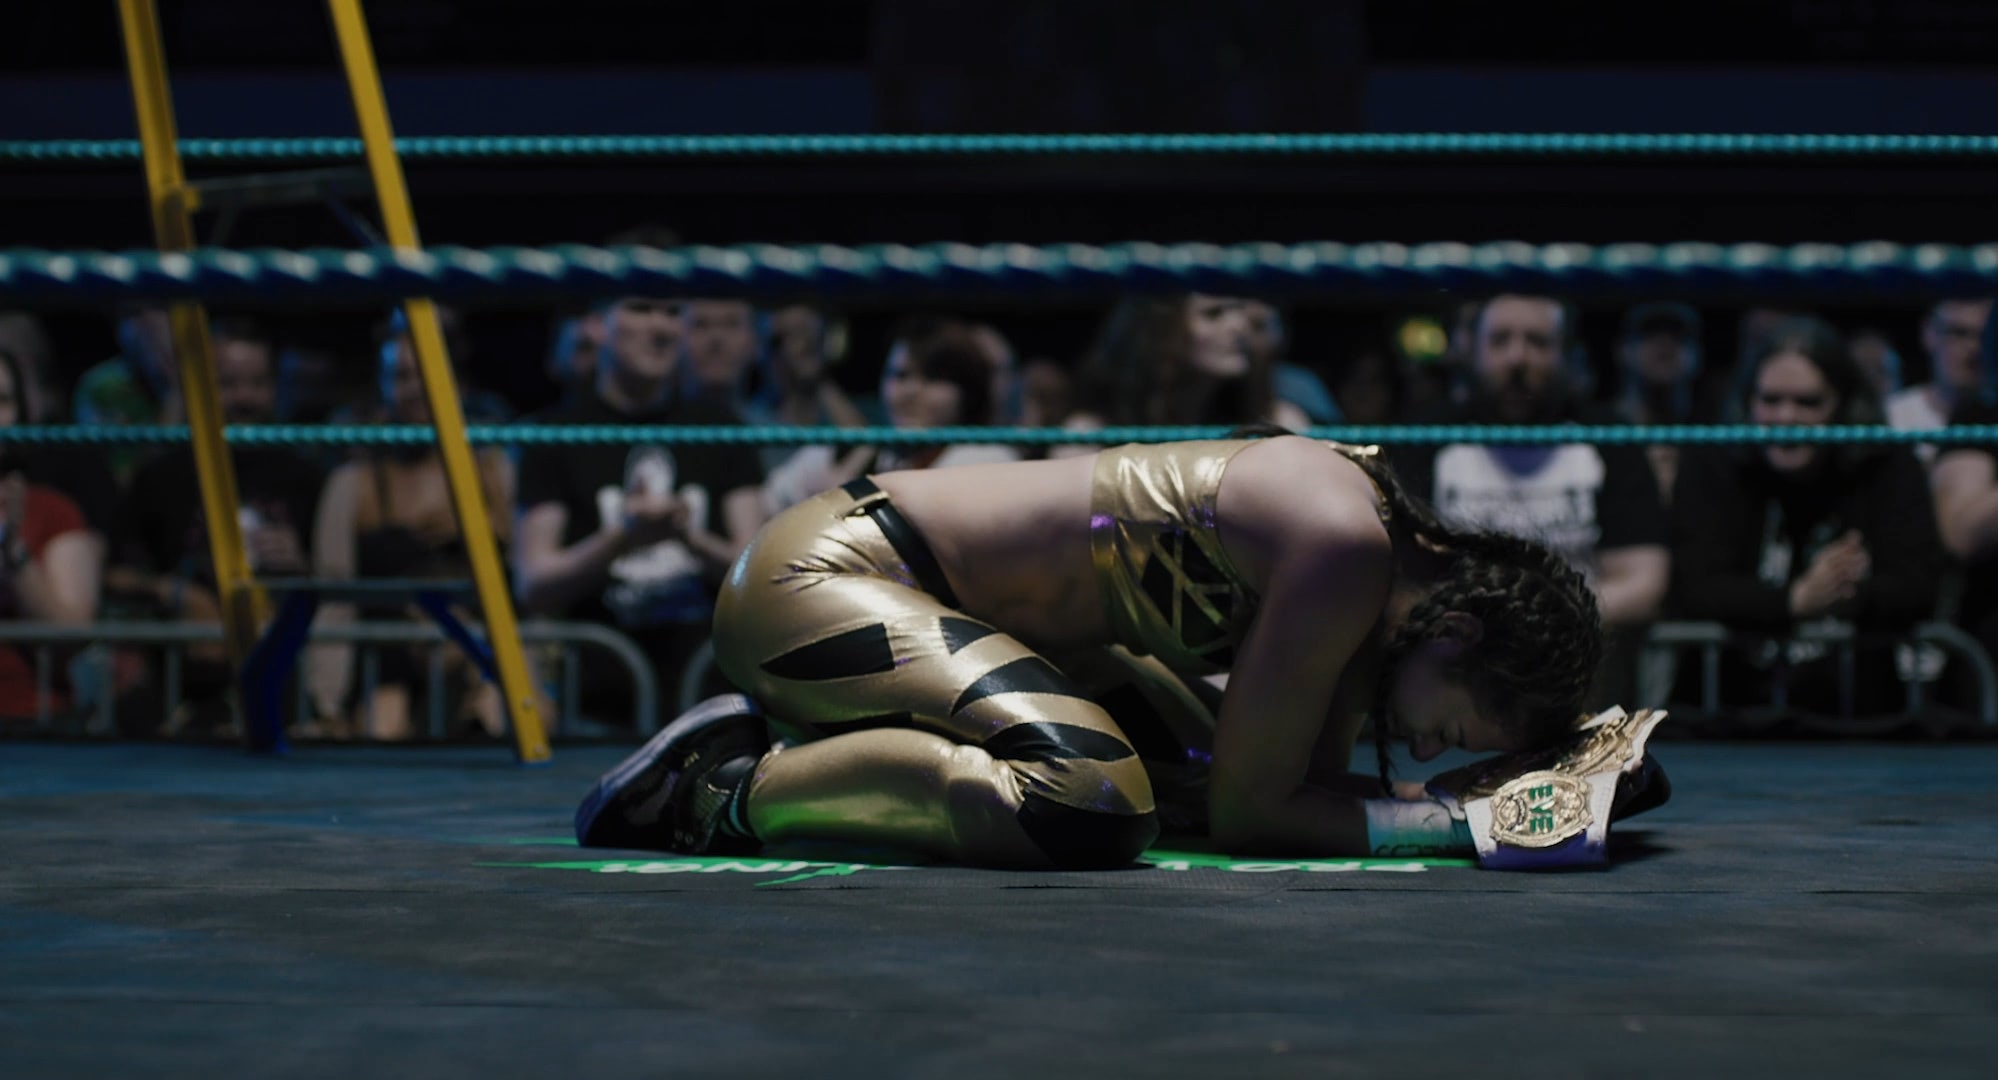 A young woman overcome with emotion kneeling in the wrestling ring, embracing a trophy